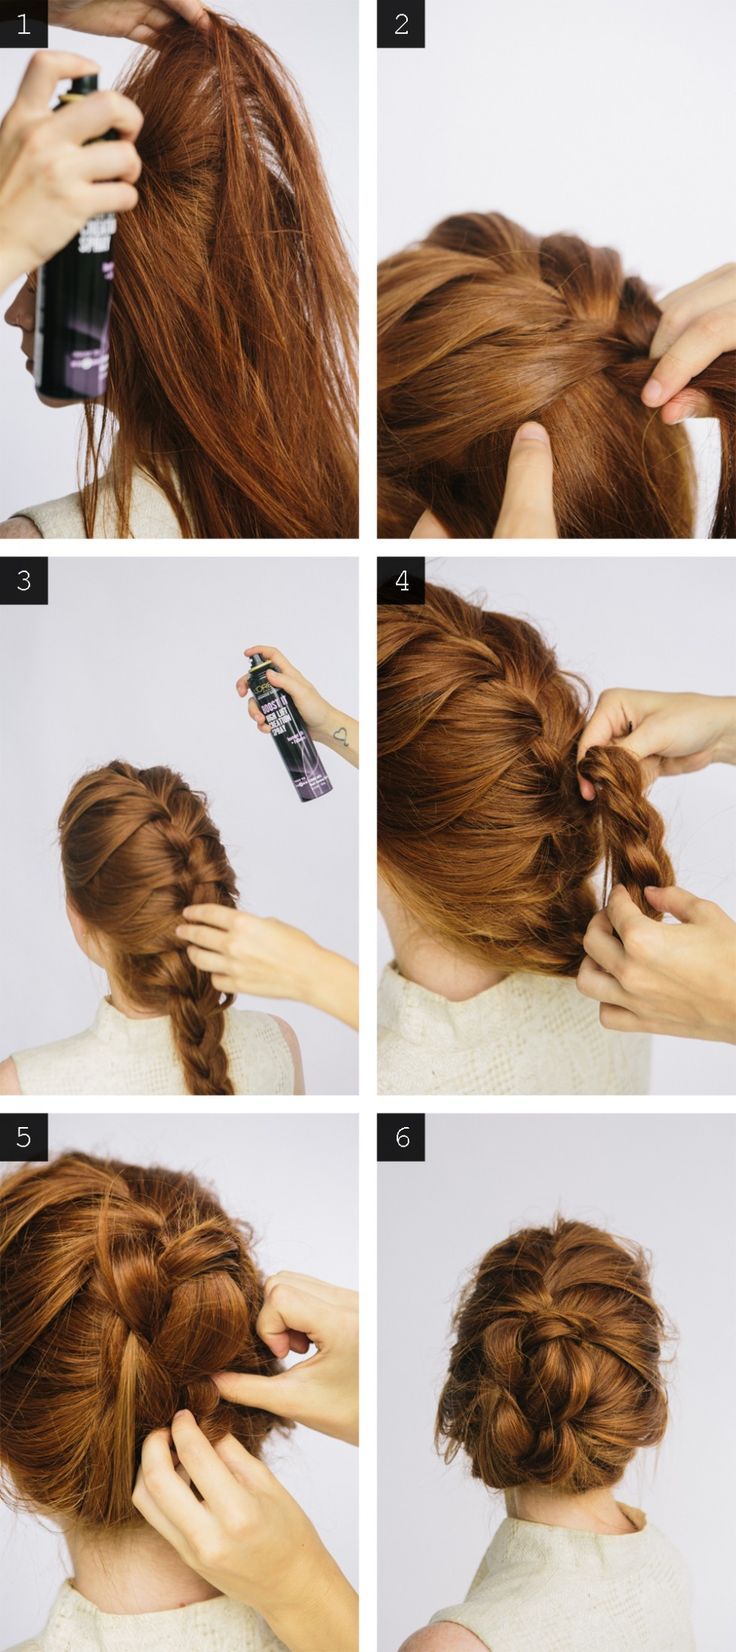 How-To: Braided Bun with L’Oreal Paris Advanced Hairstyle hairstyle.com